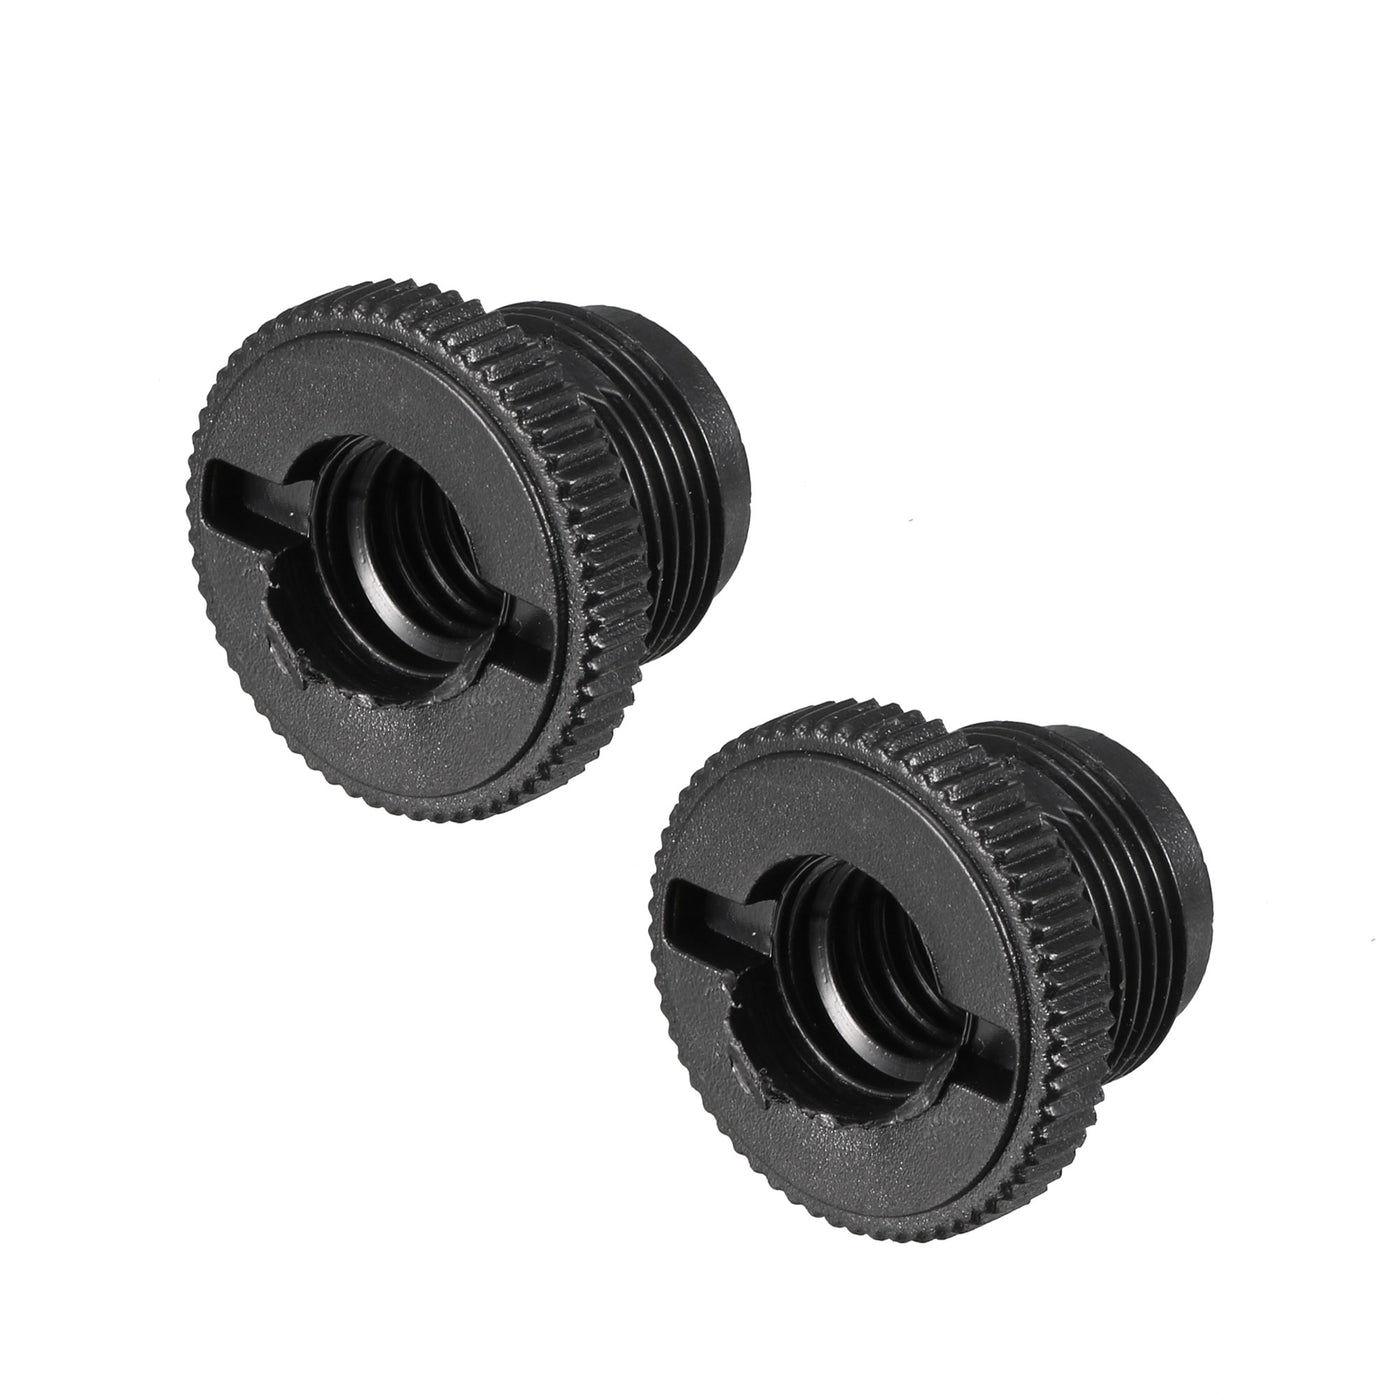 uxcell Uxcell 3/8” Female to 5/8" Male Threaded Screw Adapter for Mic Stand Plastic 2pcs